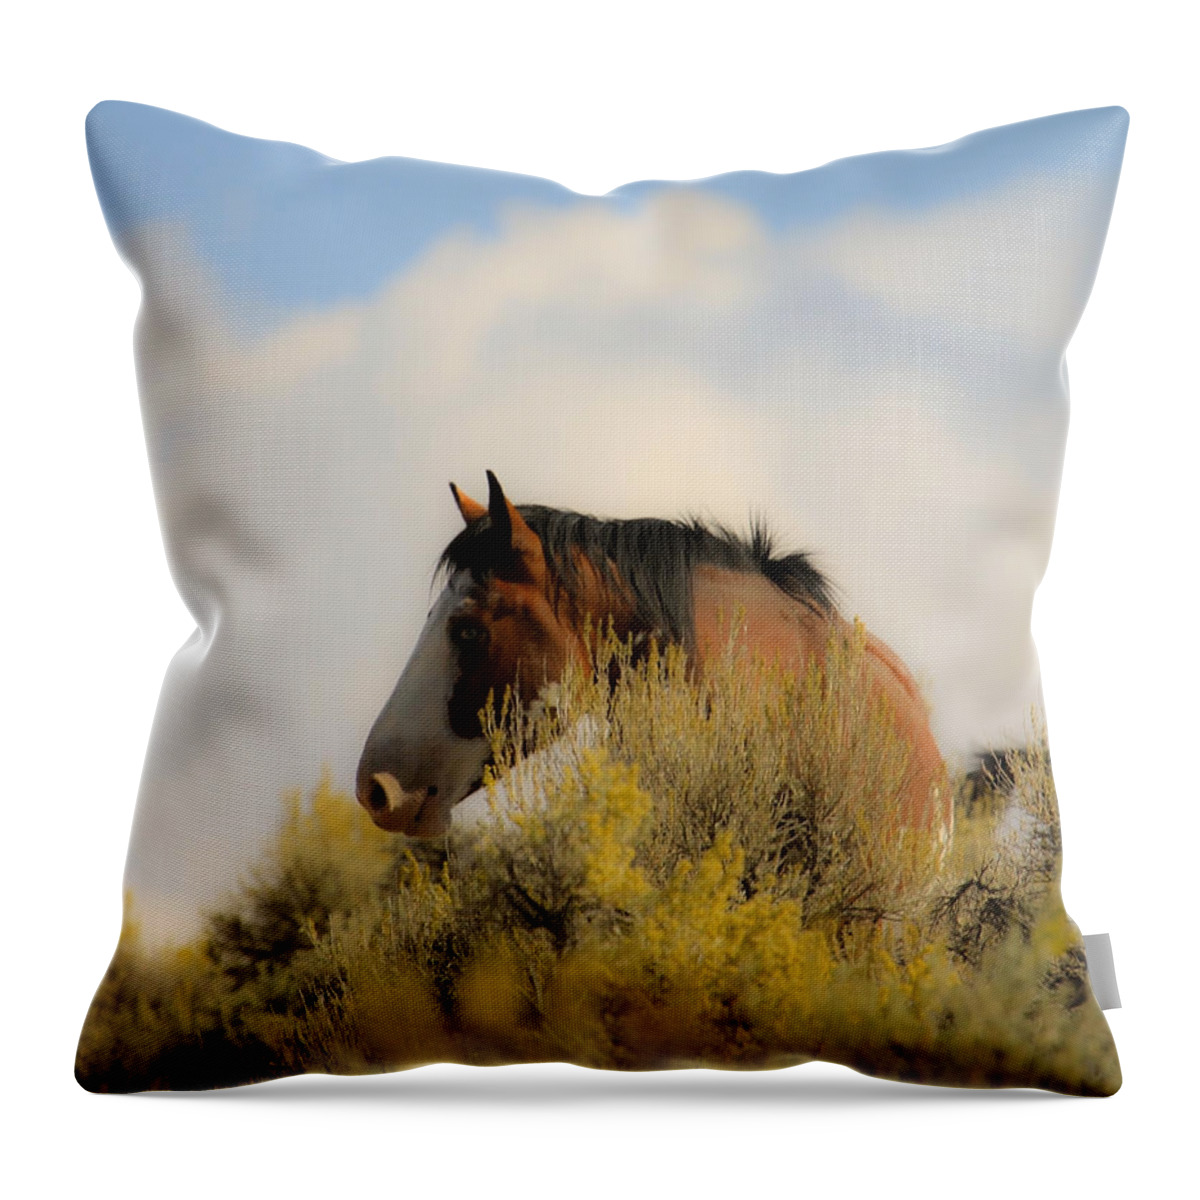 White Horses Throw Pillow featuring the photograph Over the Hill Pinto by Steve McKinzie